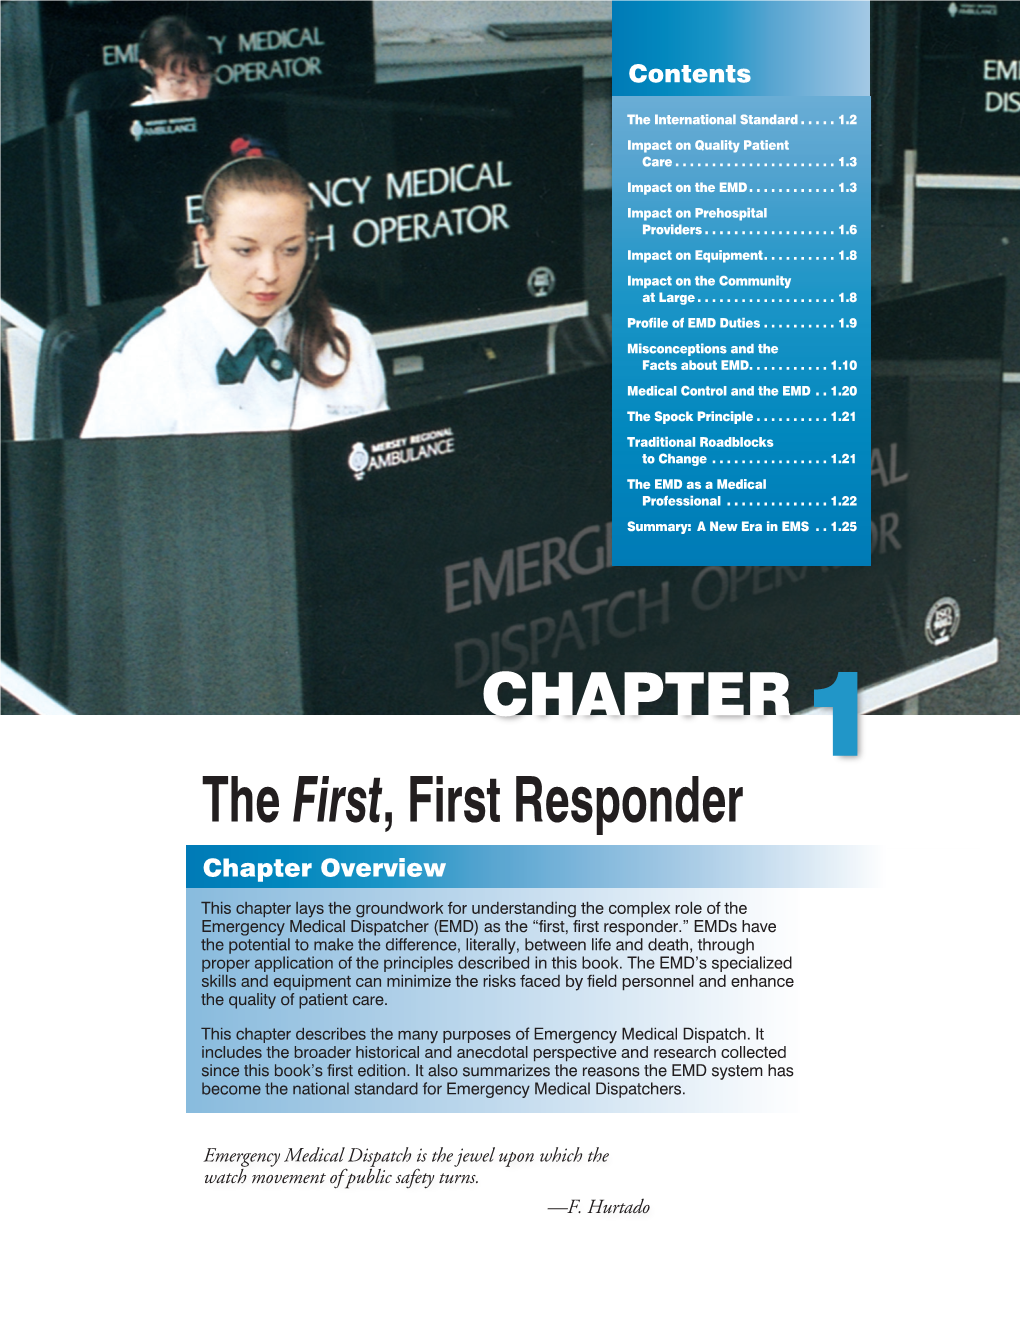 The First, First Responder Chapter Overview